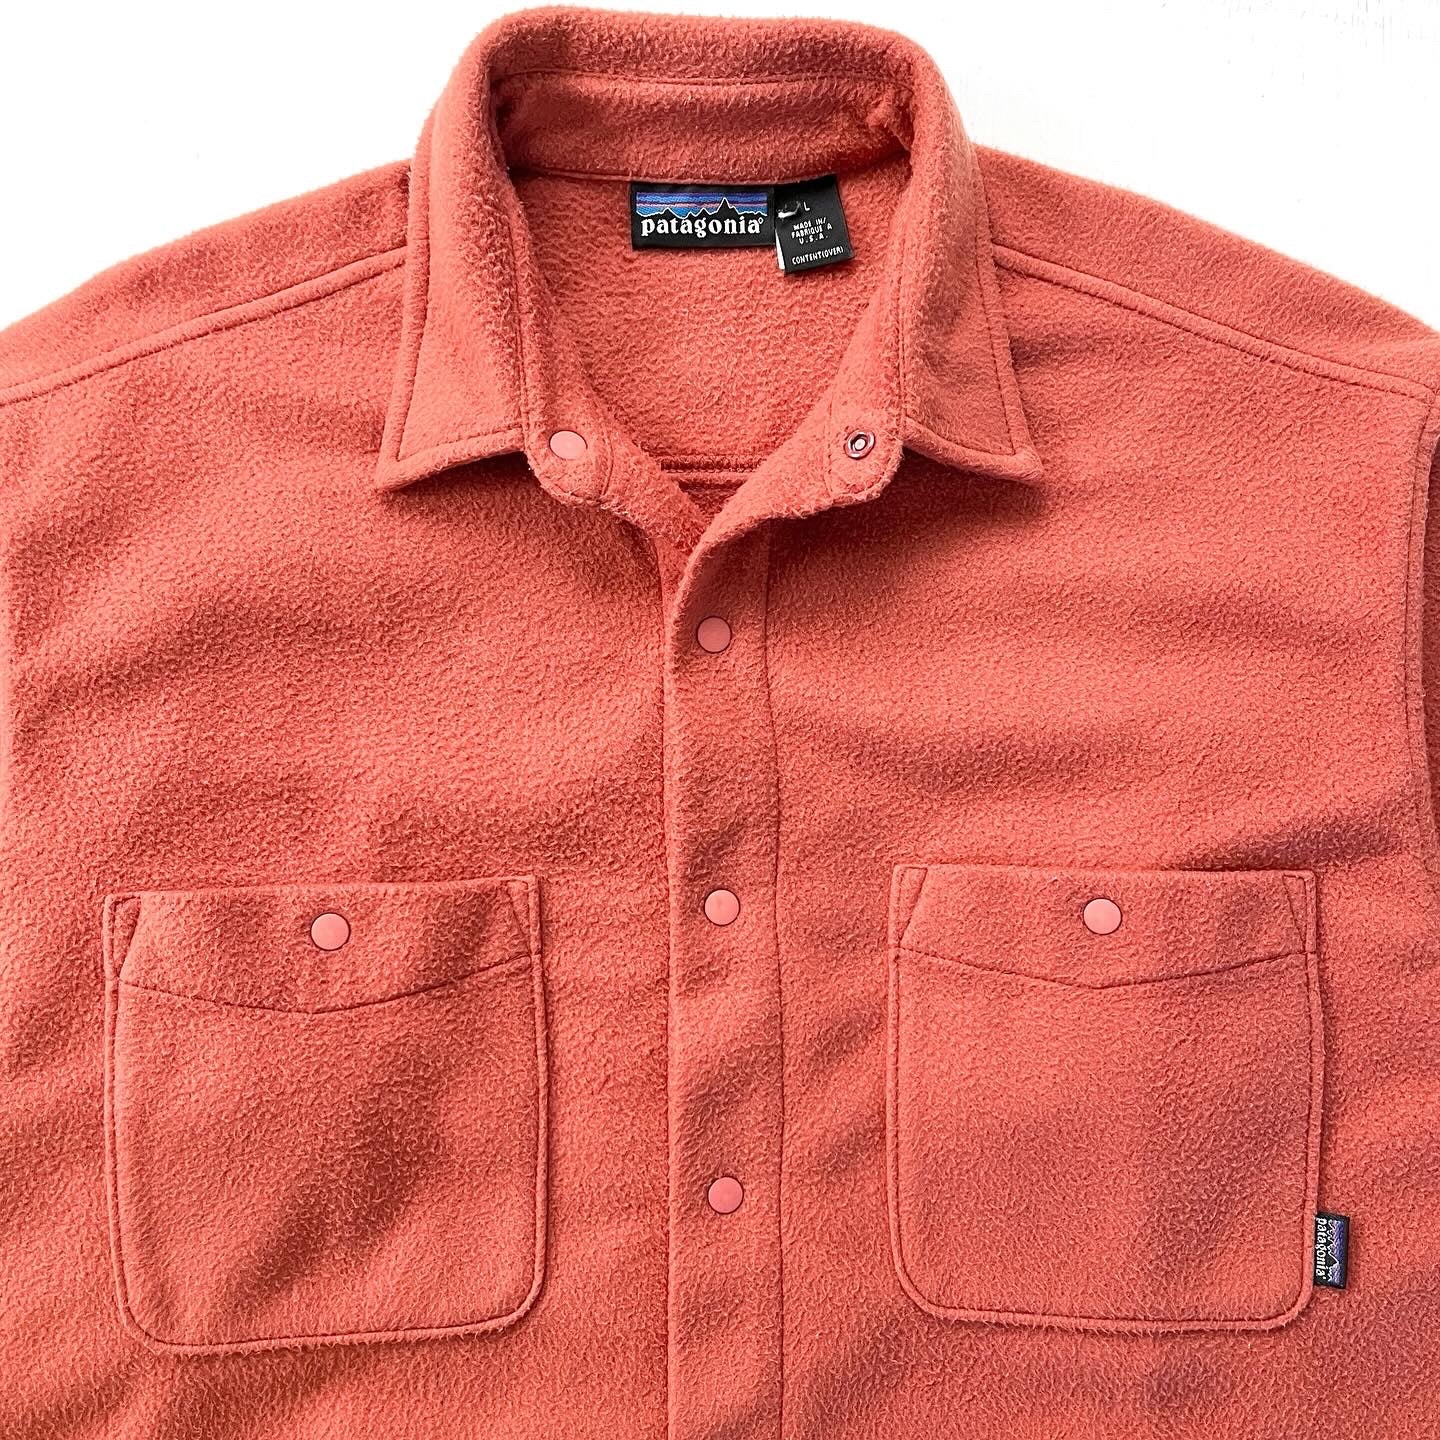 1995 Patagonia Made In The U.S.A. Synchilla Shirt, Copper (L/XL)